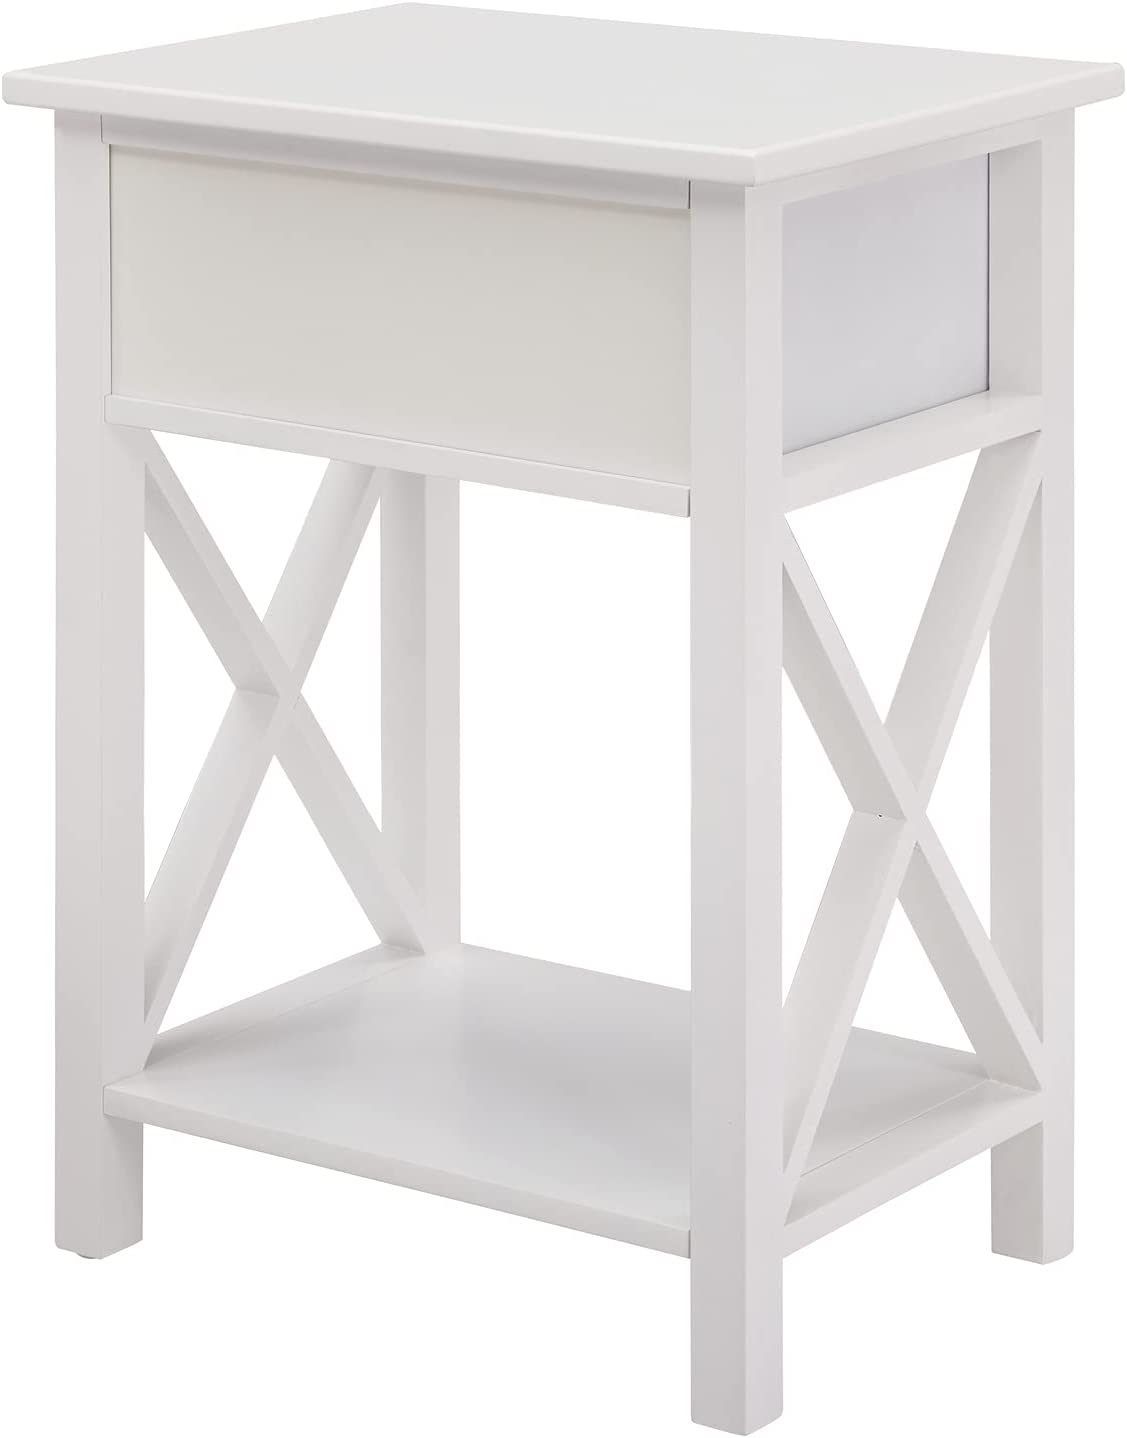 Eily Night Stand Bedside Table with Drawer Wooden Side Tables Bedroom Night Stands for Bedrooms Small Nightstand End Table with Drawer and Shelf Ideal for Small Spaces 1.8 ft Night Stand White - image 2 of 10